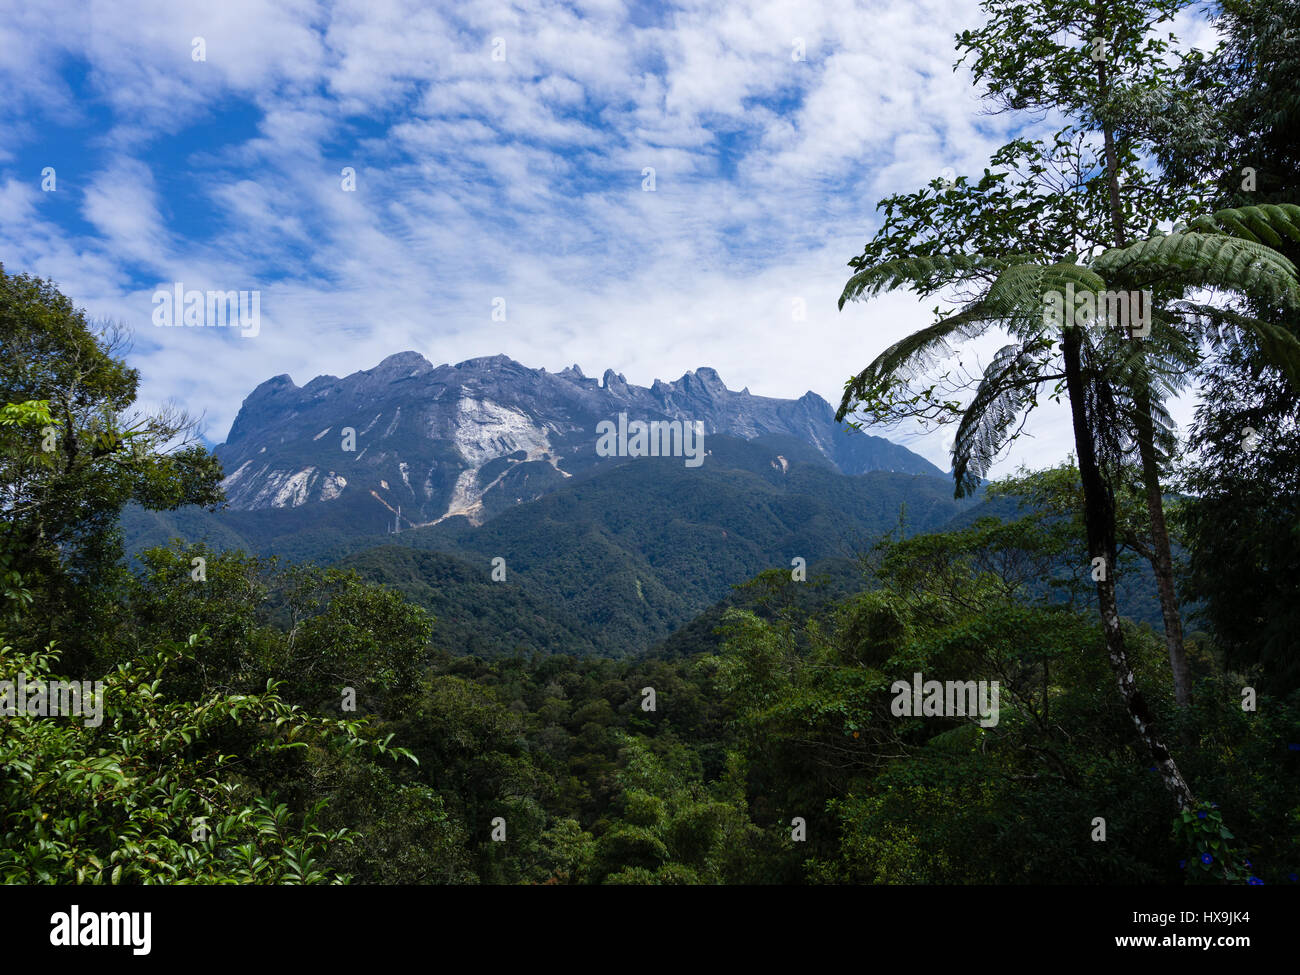 Beautiful view of Mount Kinabalu with trees and ferns, Sabah Borneo, Malaysia. Stock Photo